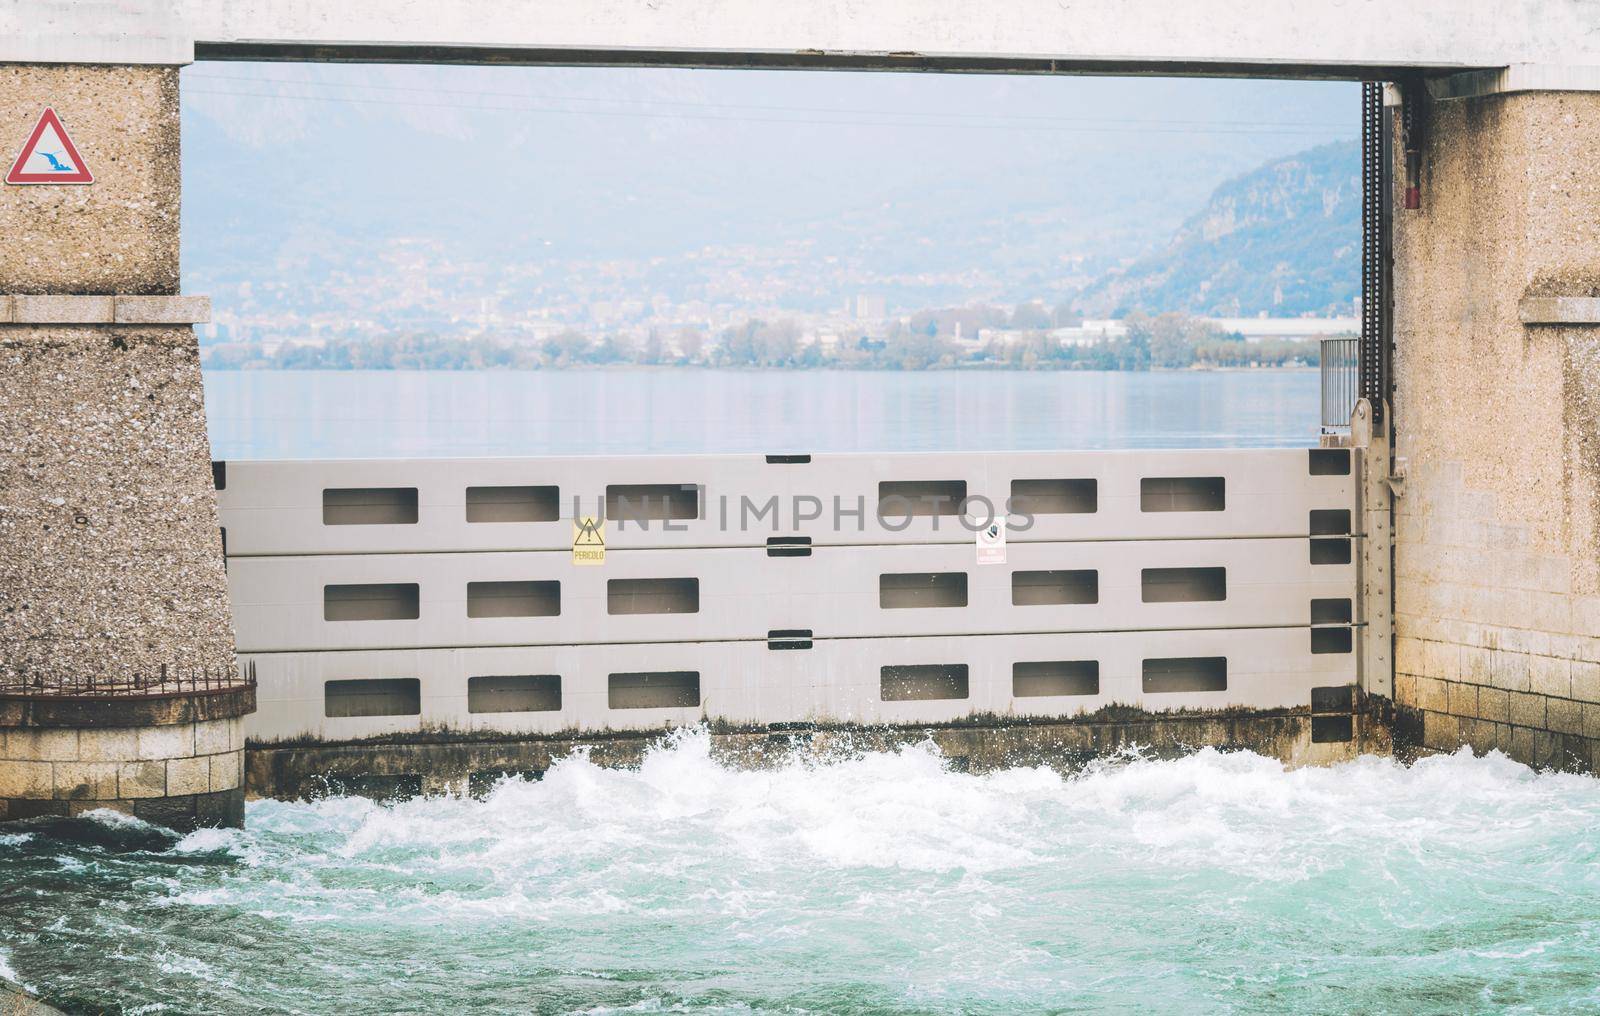 Italian dam - Diga di Olginate - divides the lakes Garlate and Olginate, regulates the Lake Como level and distribute outflows between the irrigation and hydroelectric utilities located downstream.